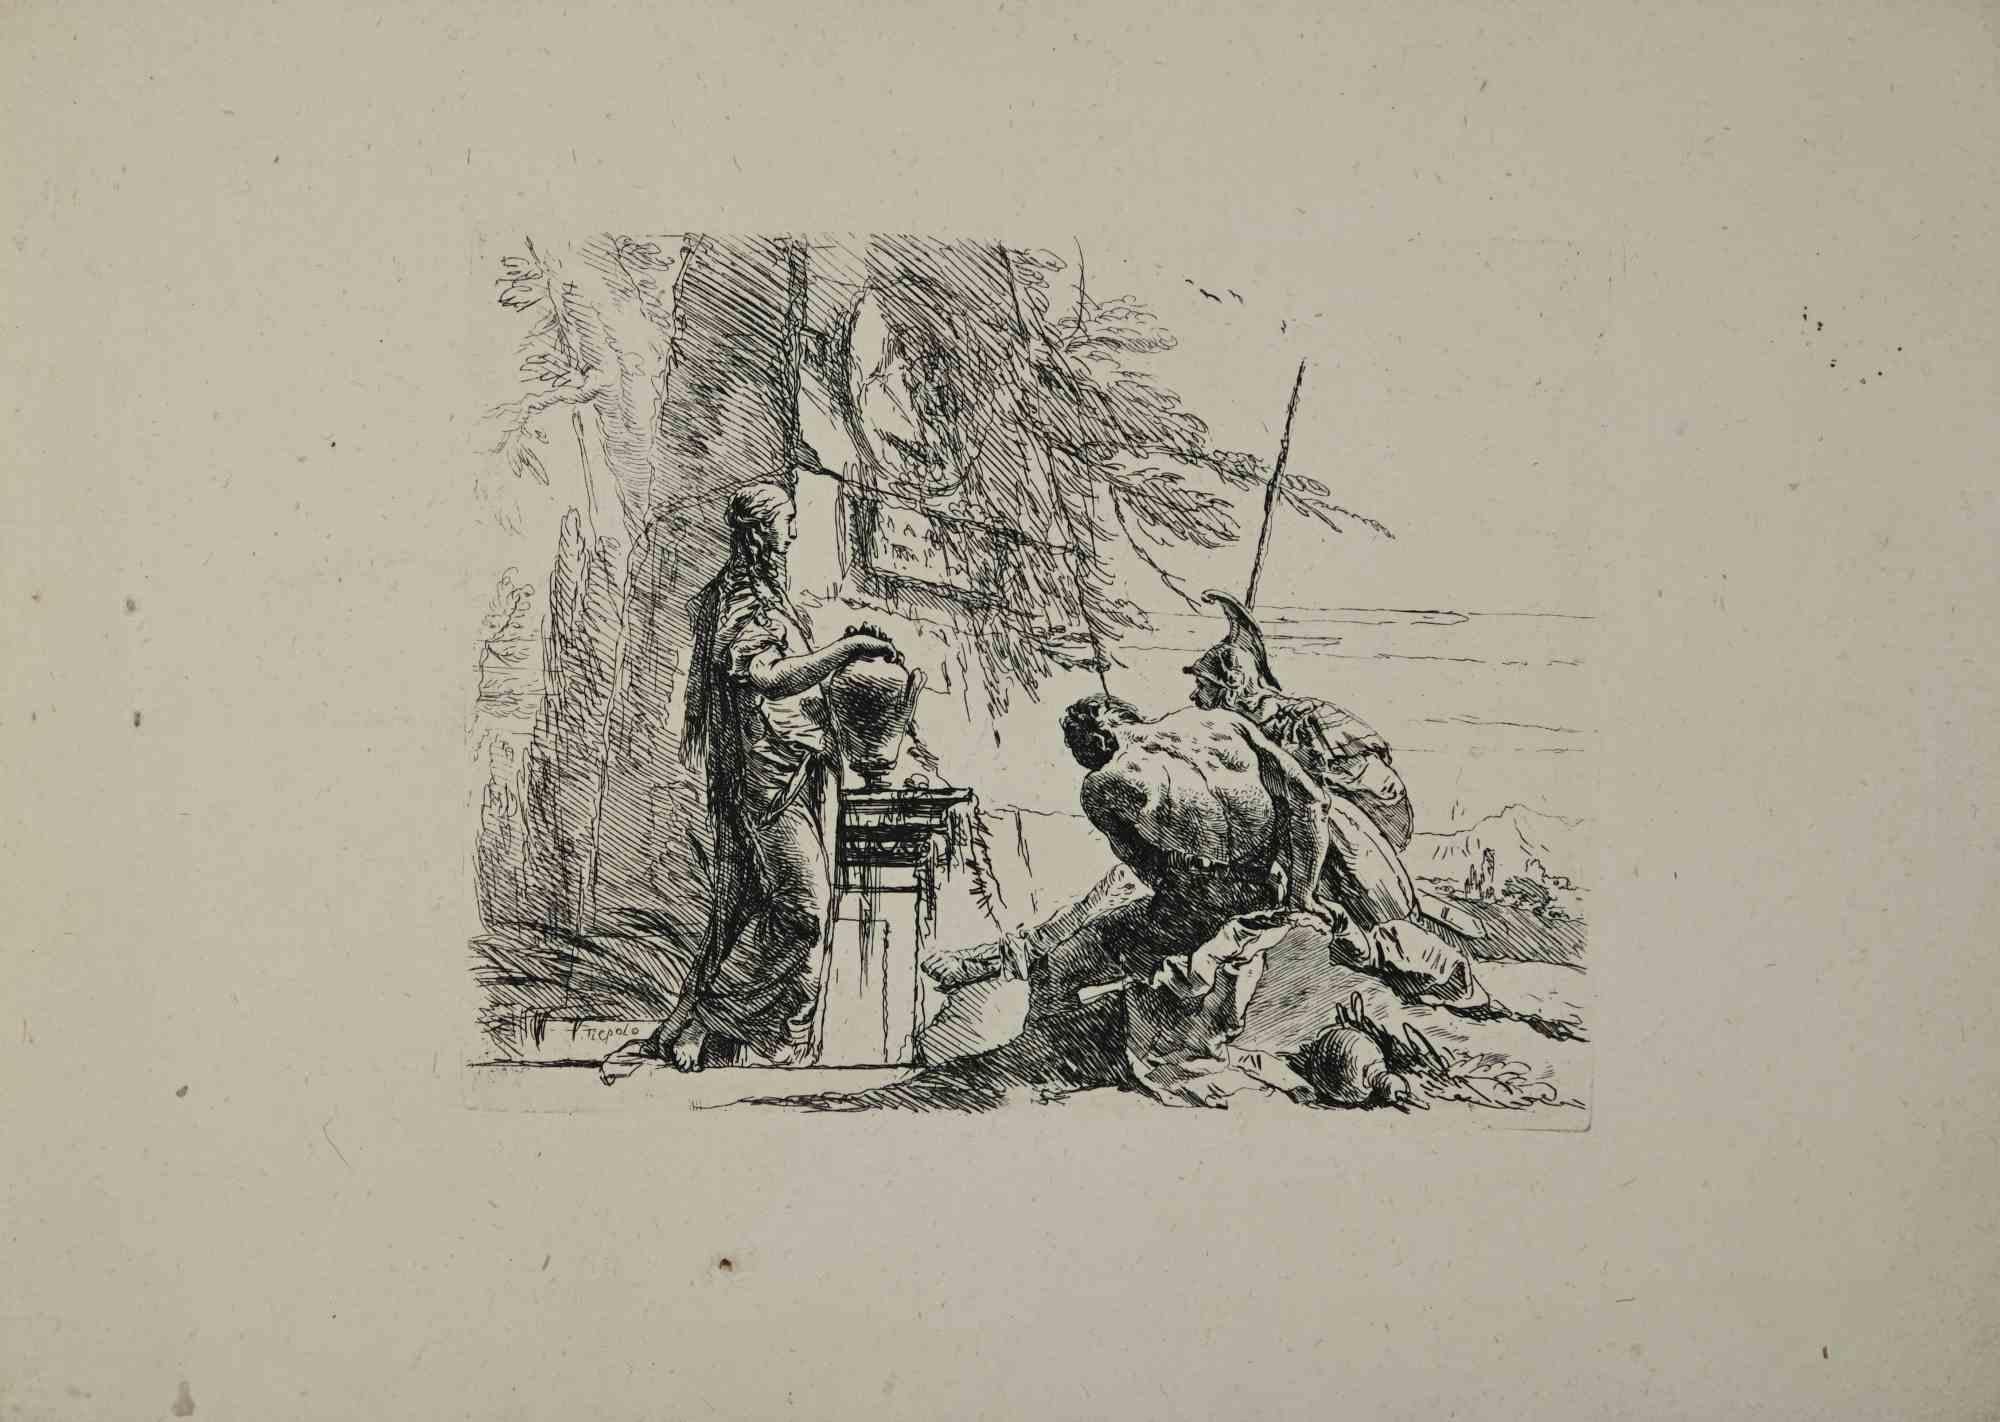 Giovanni Battista Tiepolo Figurative Print - Man and Soldier with an Urn - Etching by G.B. Tiepolo - 1785